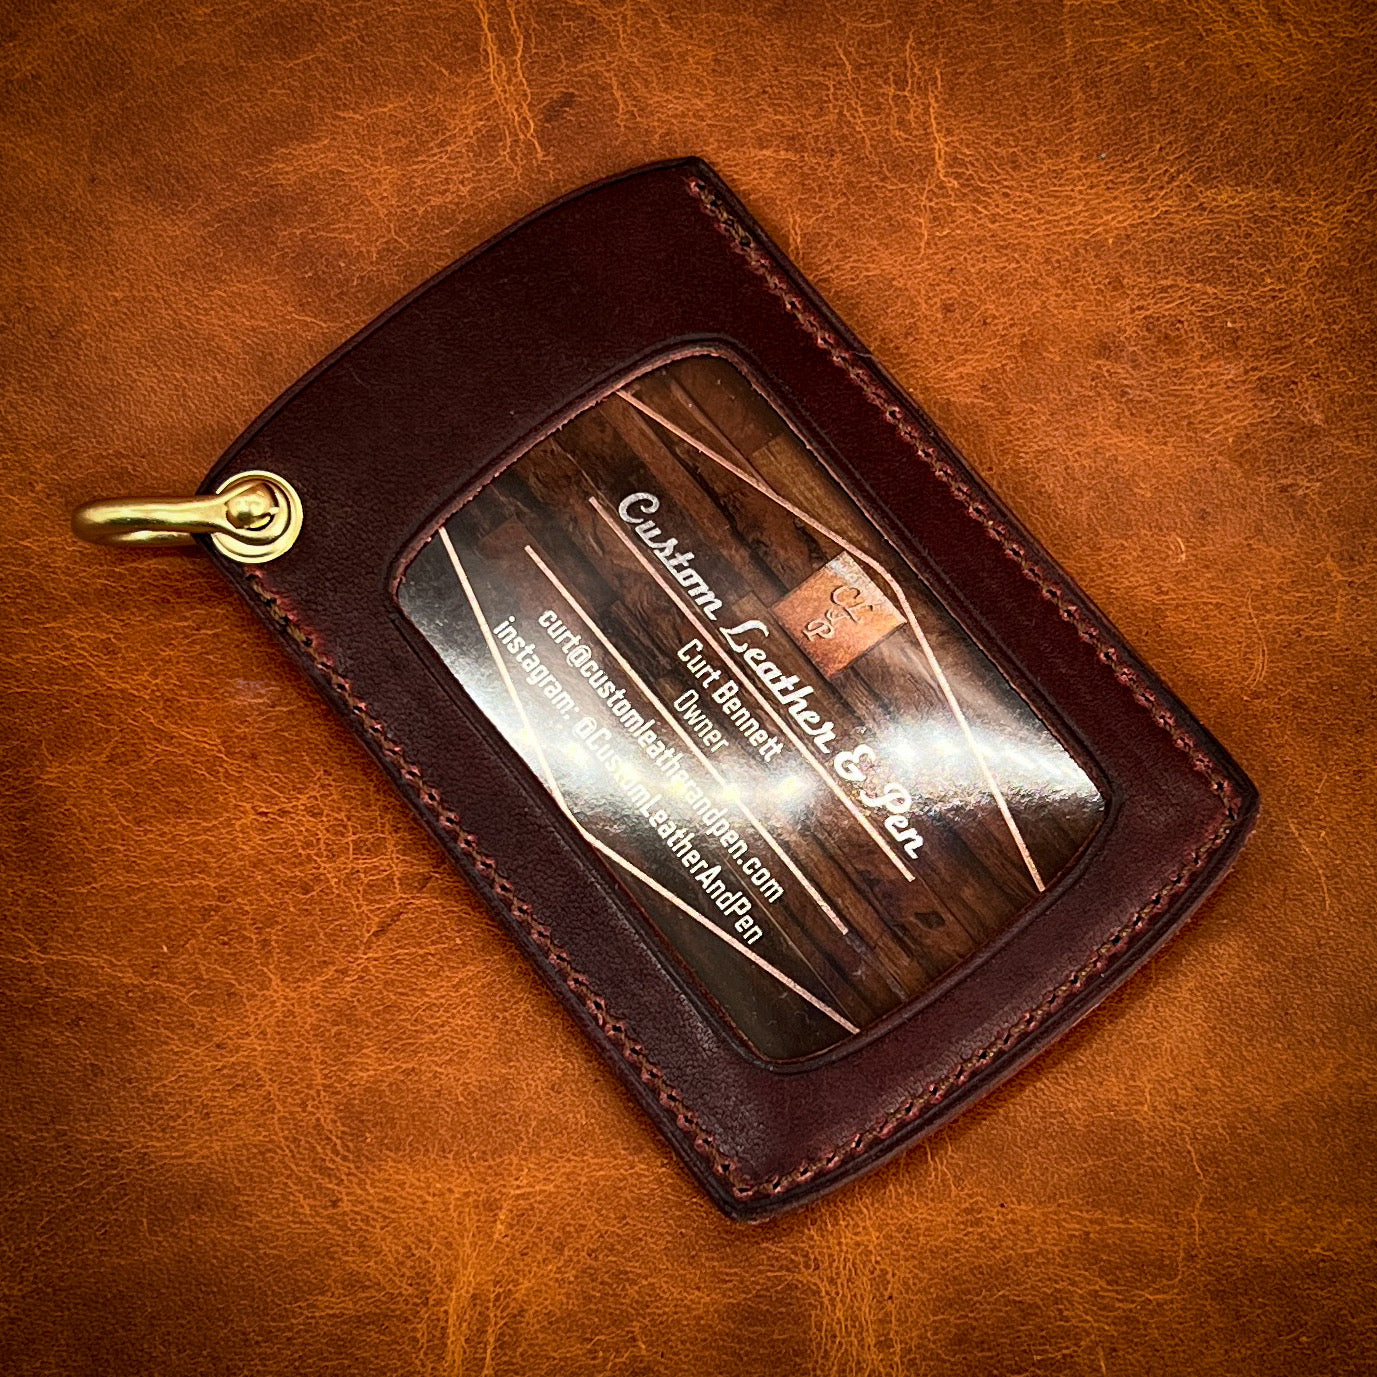 Compact Keychain Wallets in Horween Leather | Handmade to Order